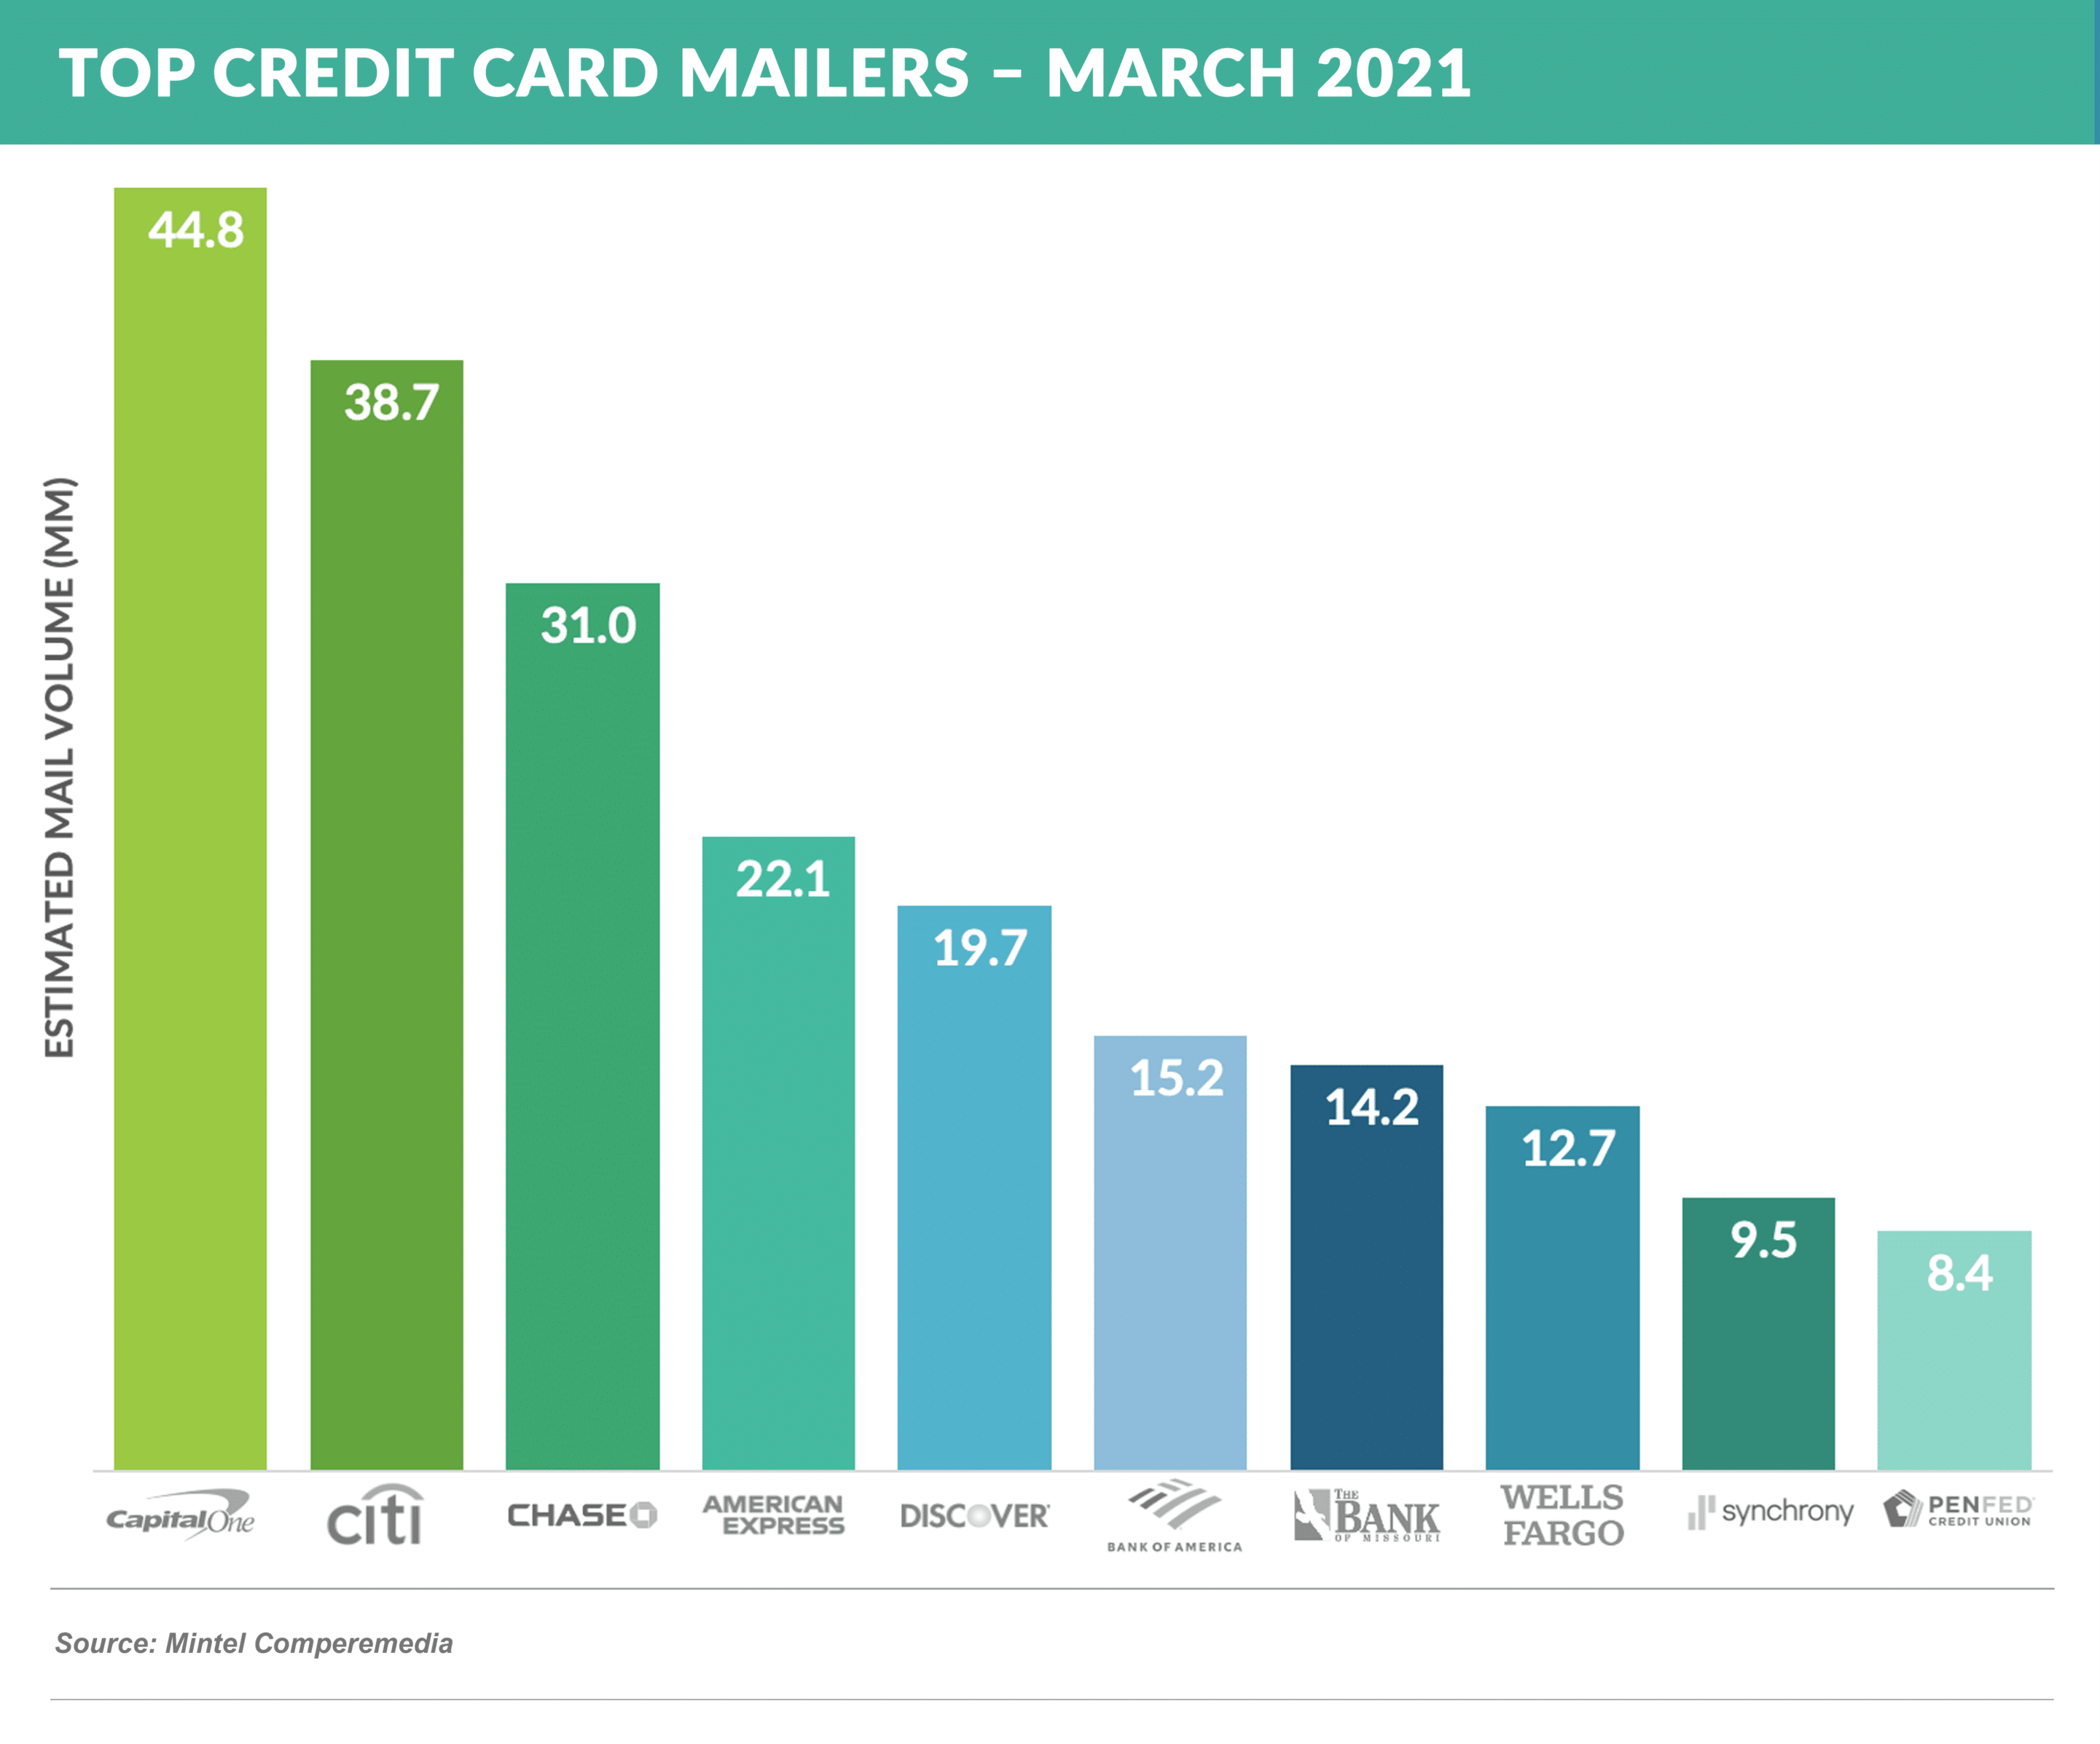 Top Credit Card Mailers – MARCH 2021